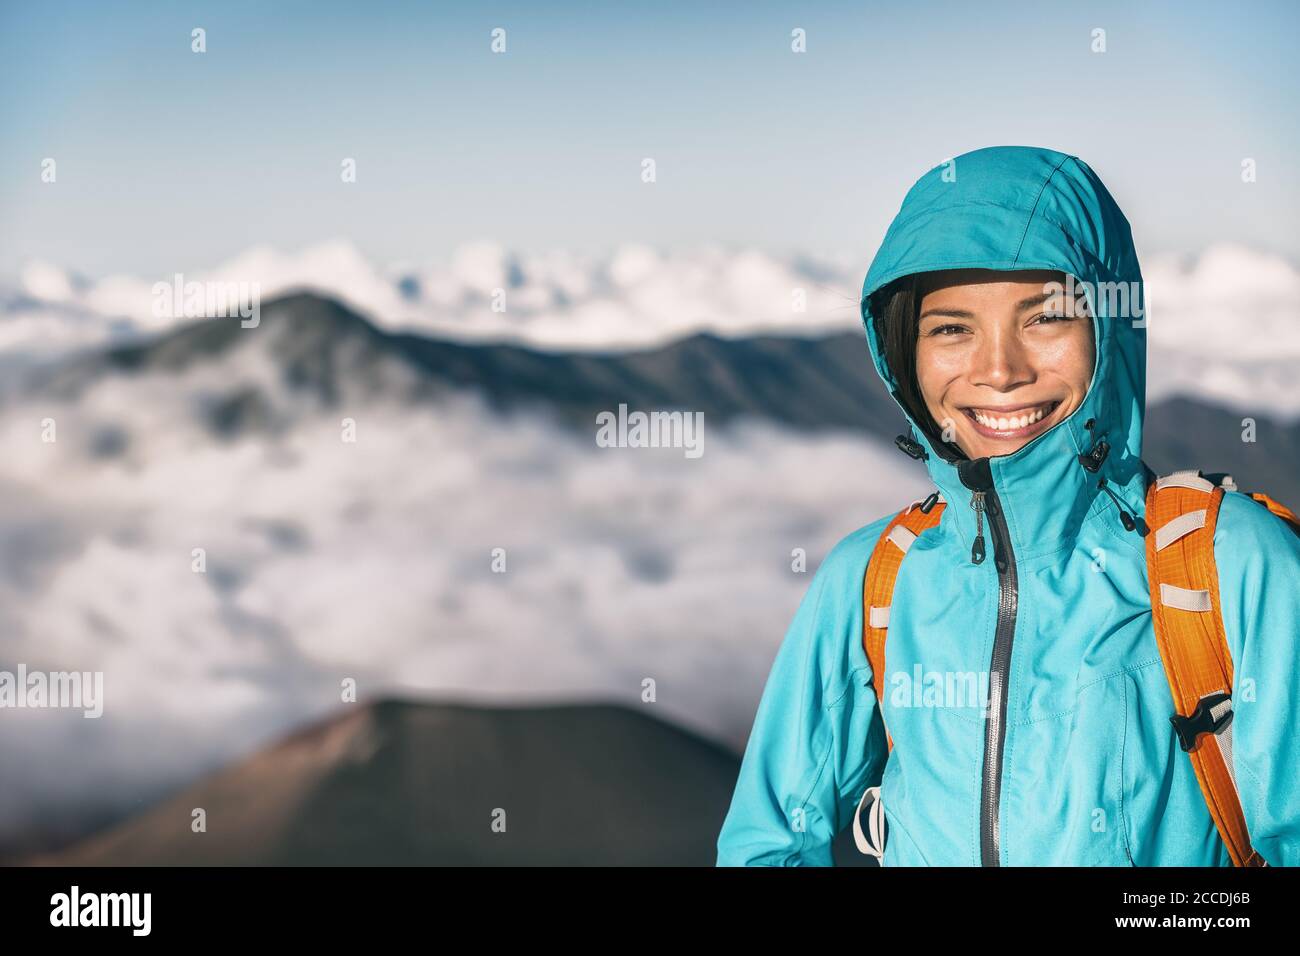 HIke in mountains hiker girl smiling portrait. Asian woman healthy ...